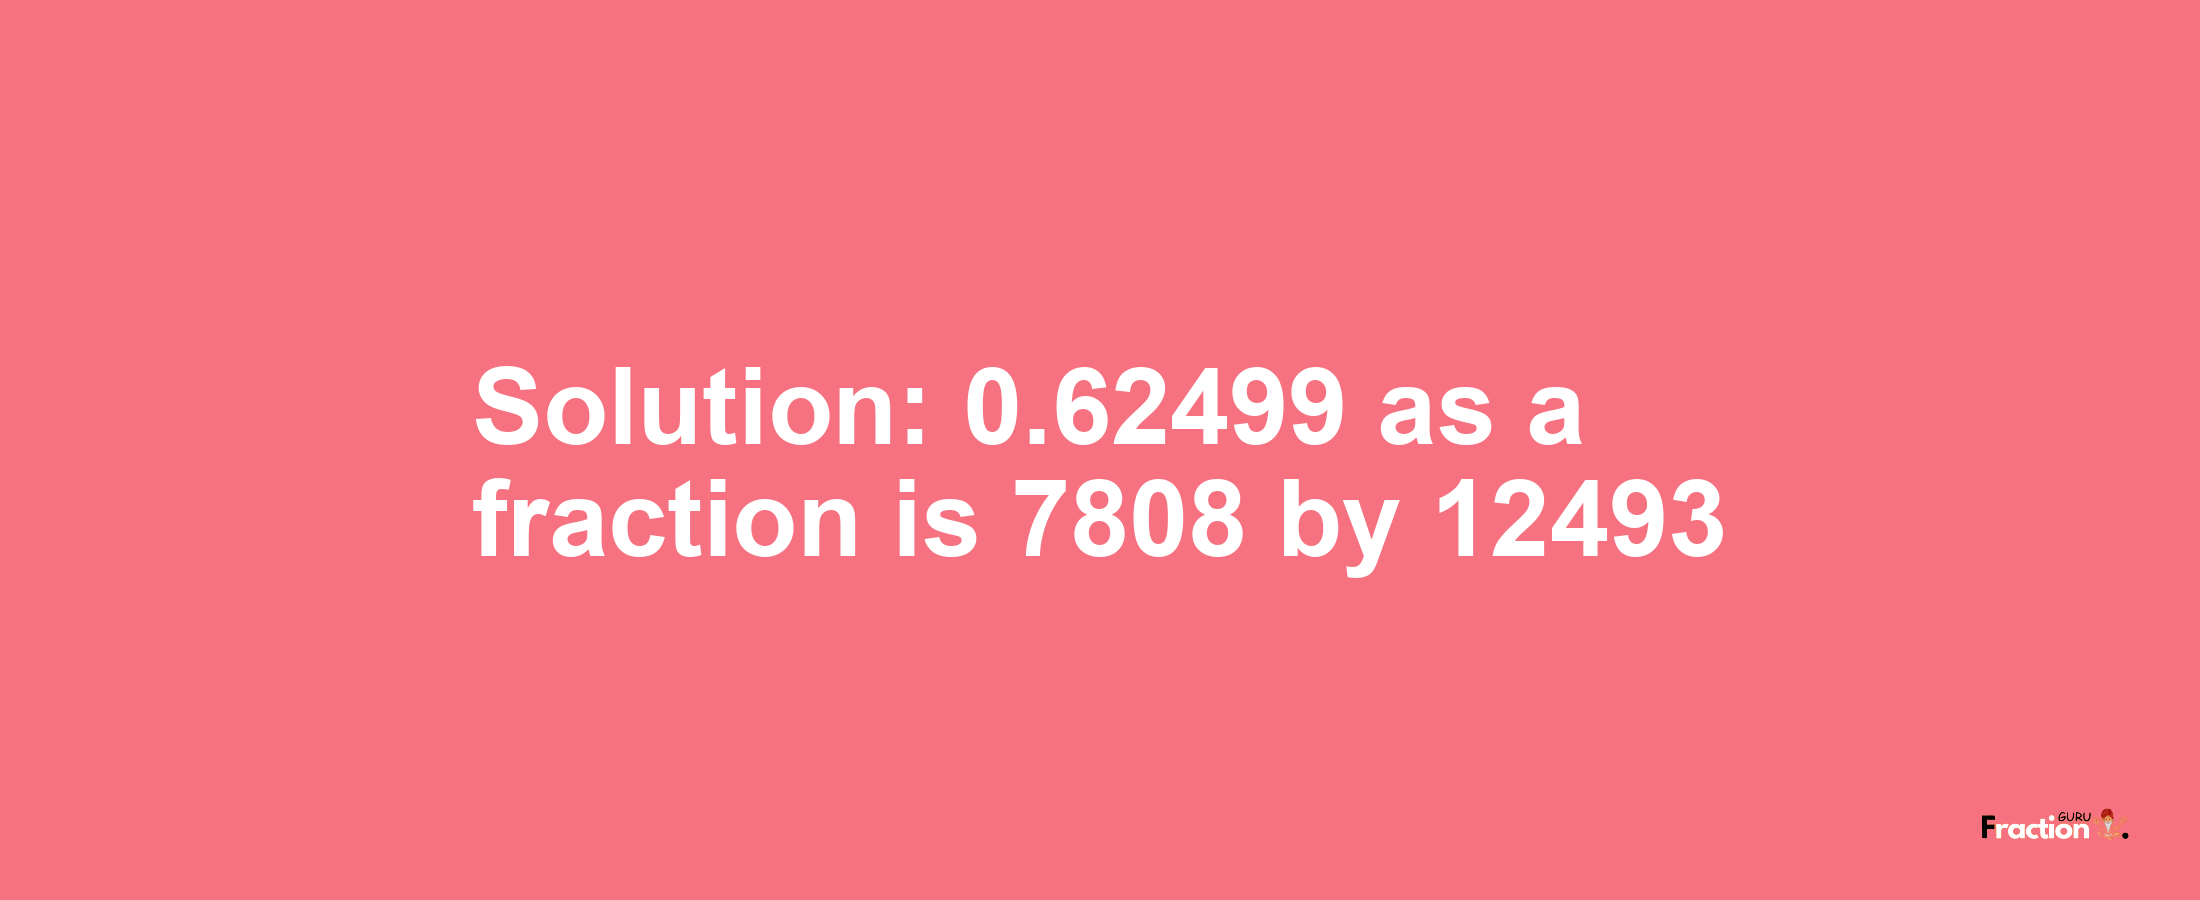 Solution:0.62499 as a fraction is 7808/12493